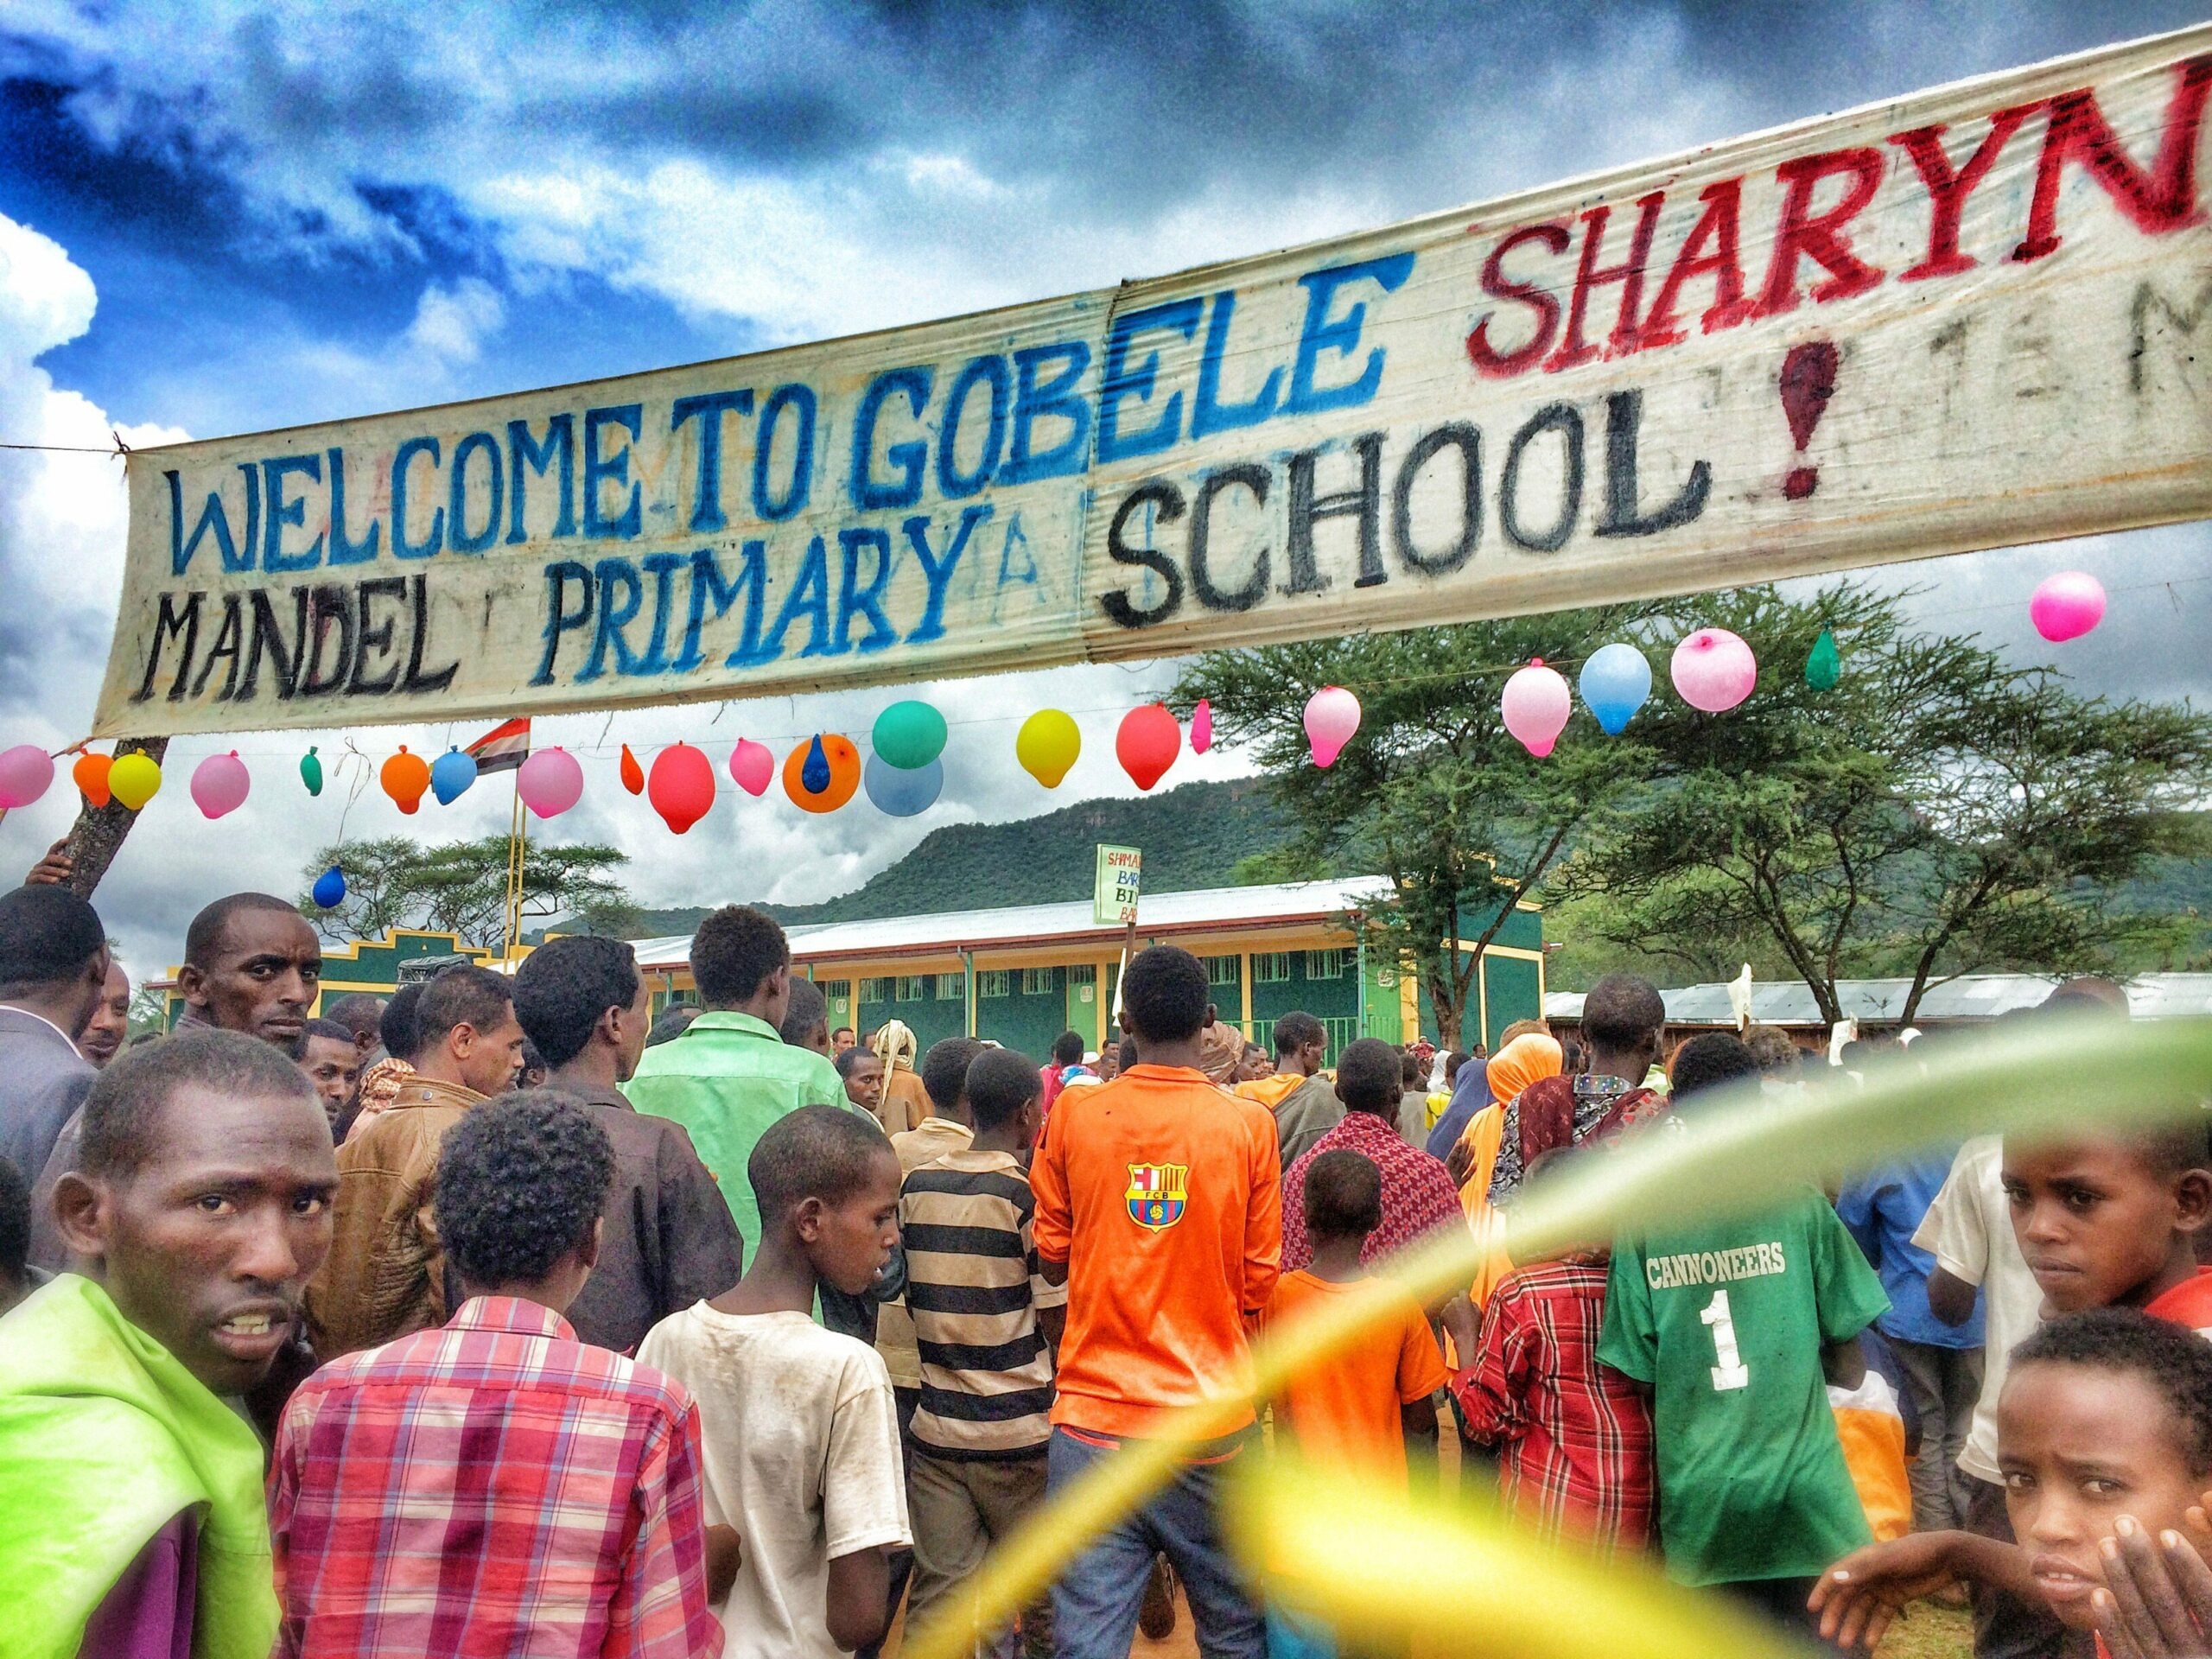 A group of people standing under a welcome sign at Gobele Sharyn Primary School